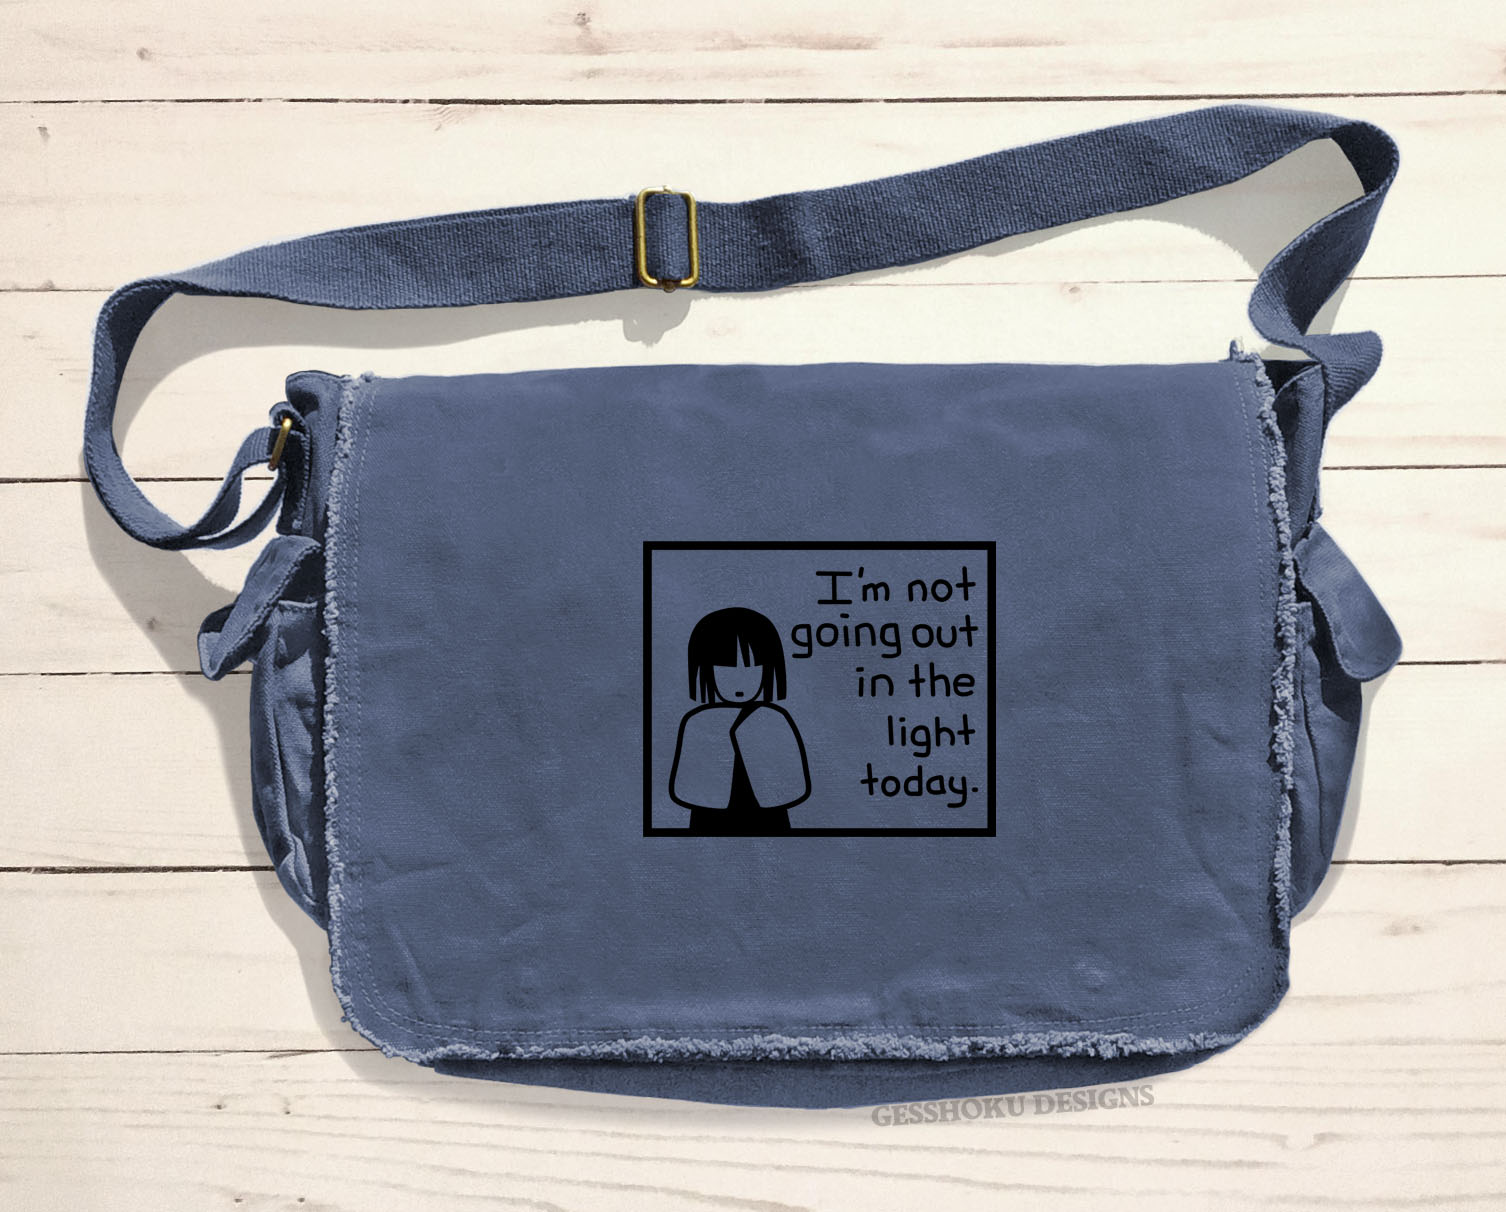 I'm Not Going Out in the Light Today Messenger Bag - Denim Blue